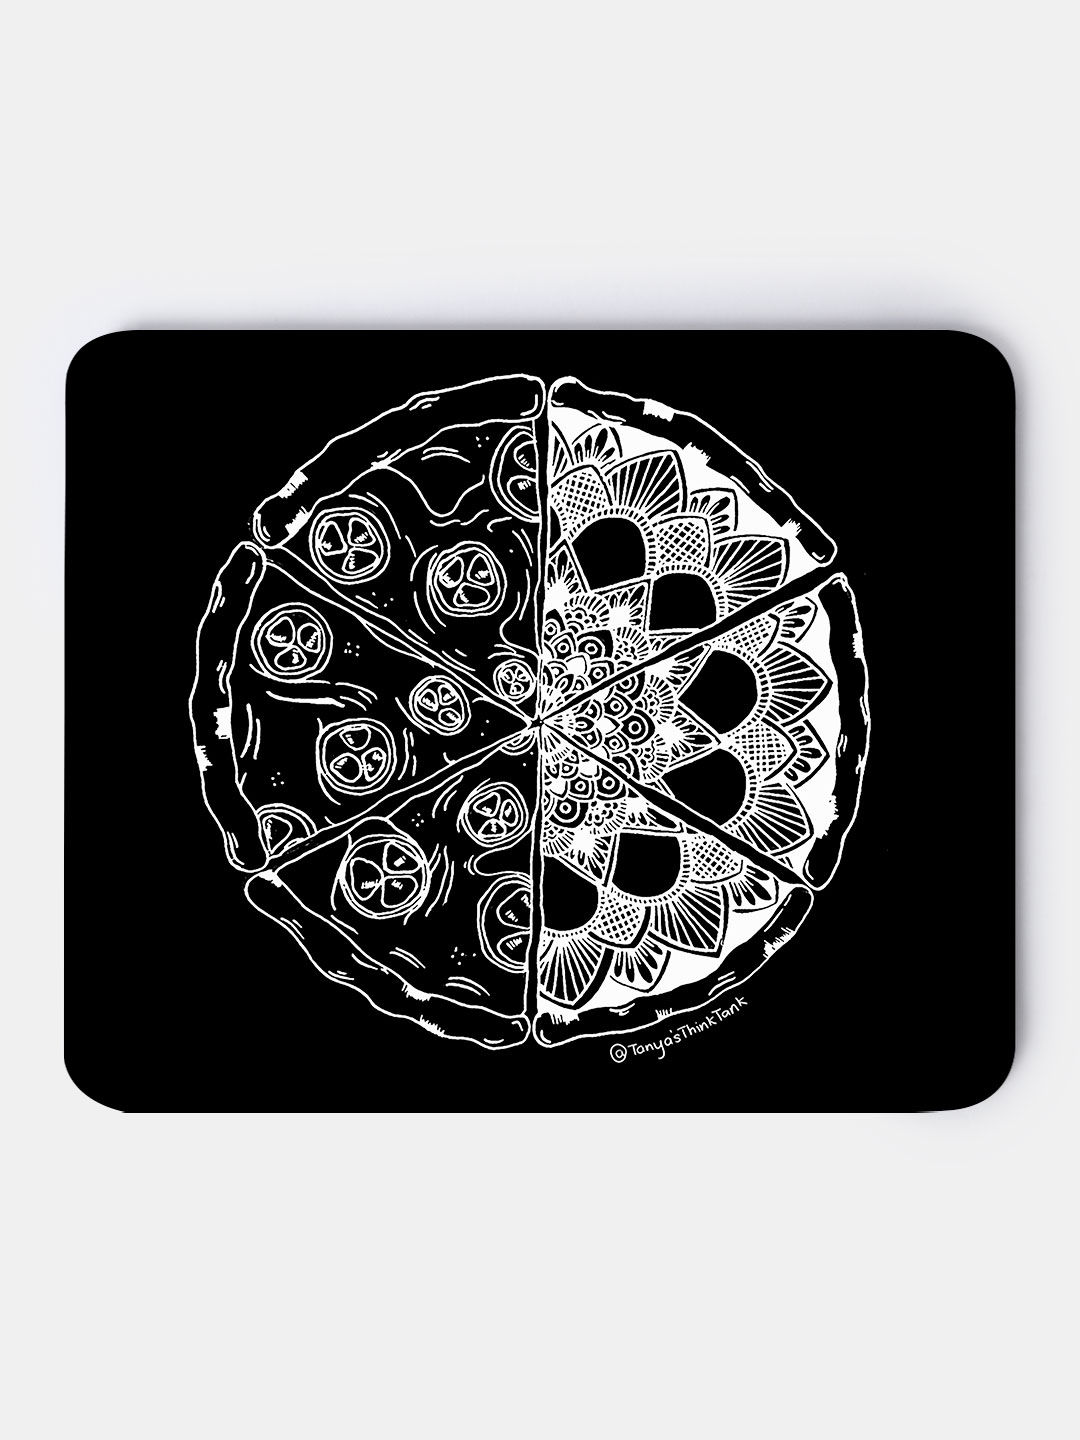 Buy Pizza White - Macmerise Mouse Pad Mouse Pads Online